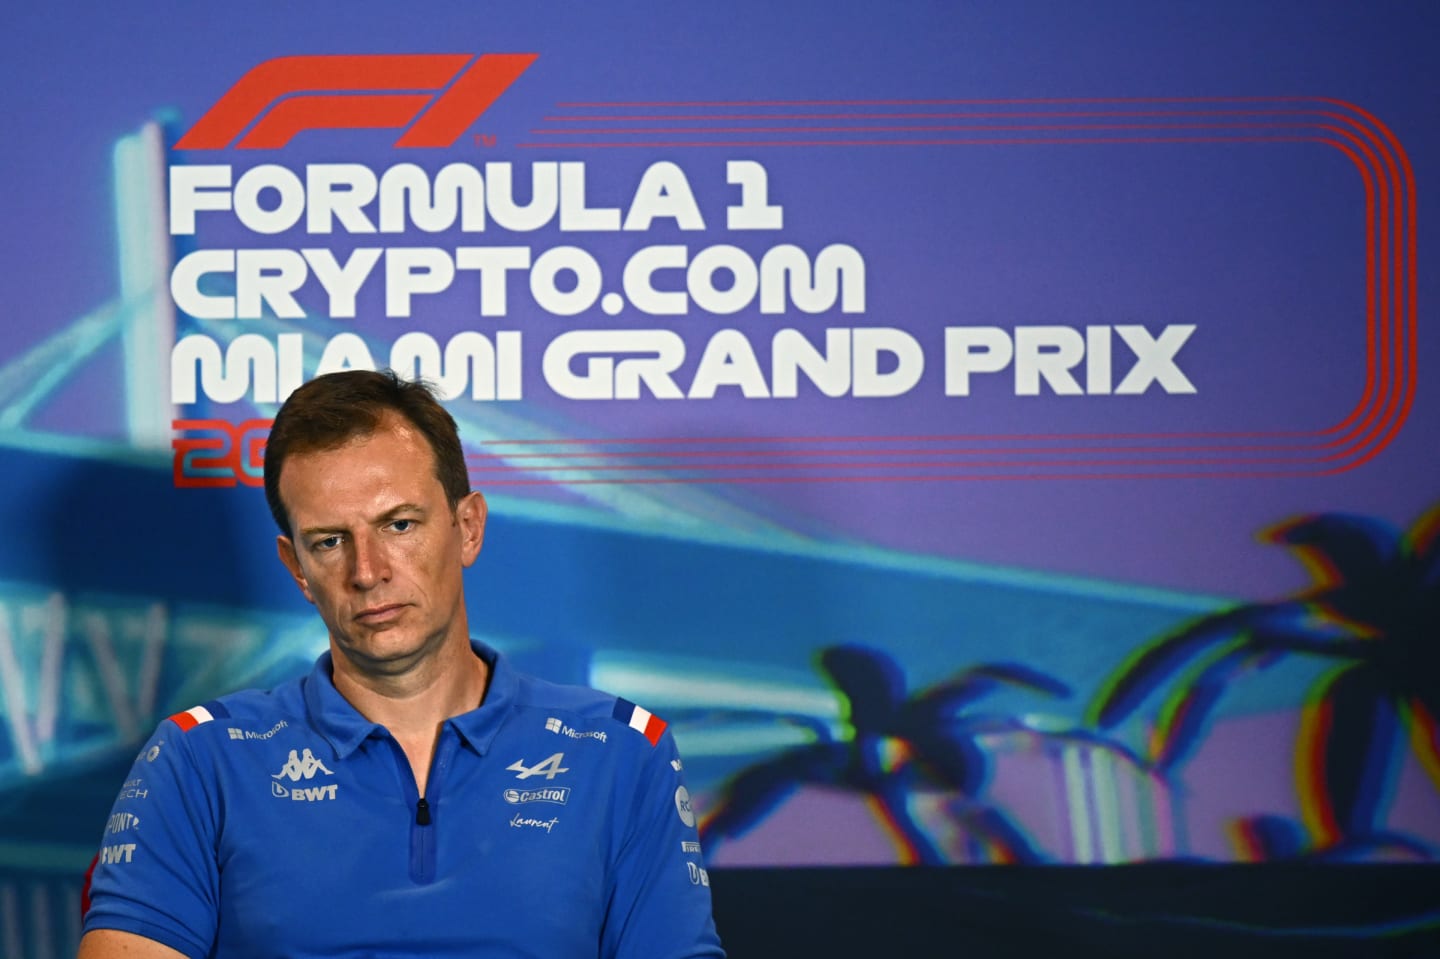 MIAMI, FLORIDA - MAY 07: Laurent Rossi, CEO of Alpine F1 talks in the Team Principals Press Conference prior to final practice ahead of the F1 Grand Prix of Miami at the Miami International Autodrome on May 07, 2022 in Miami, Florida. (Photo by Clive Mason/Getty Images)